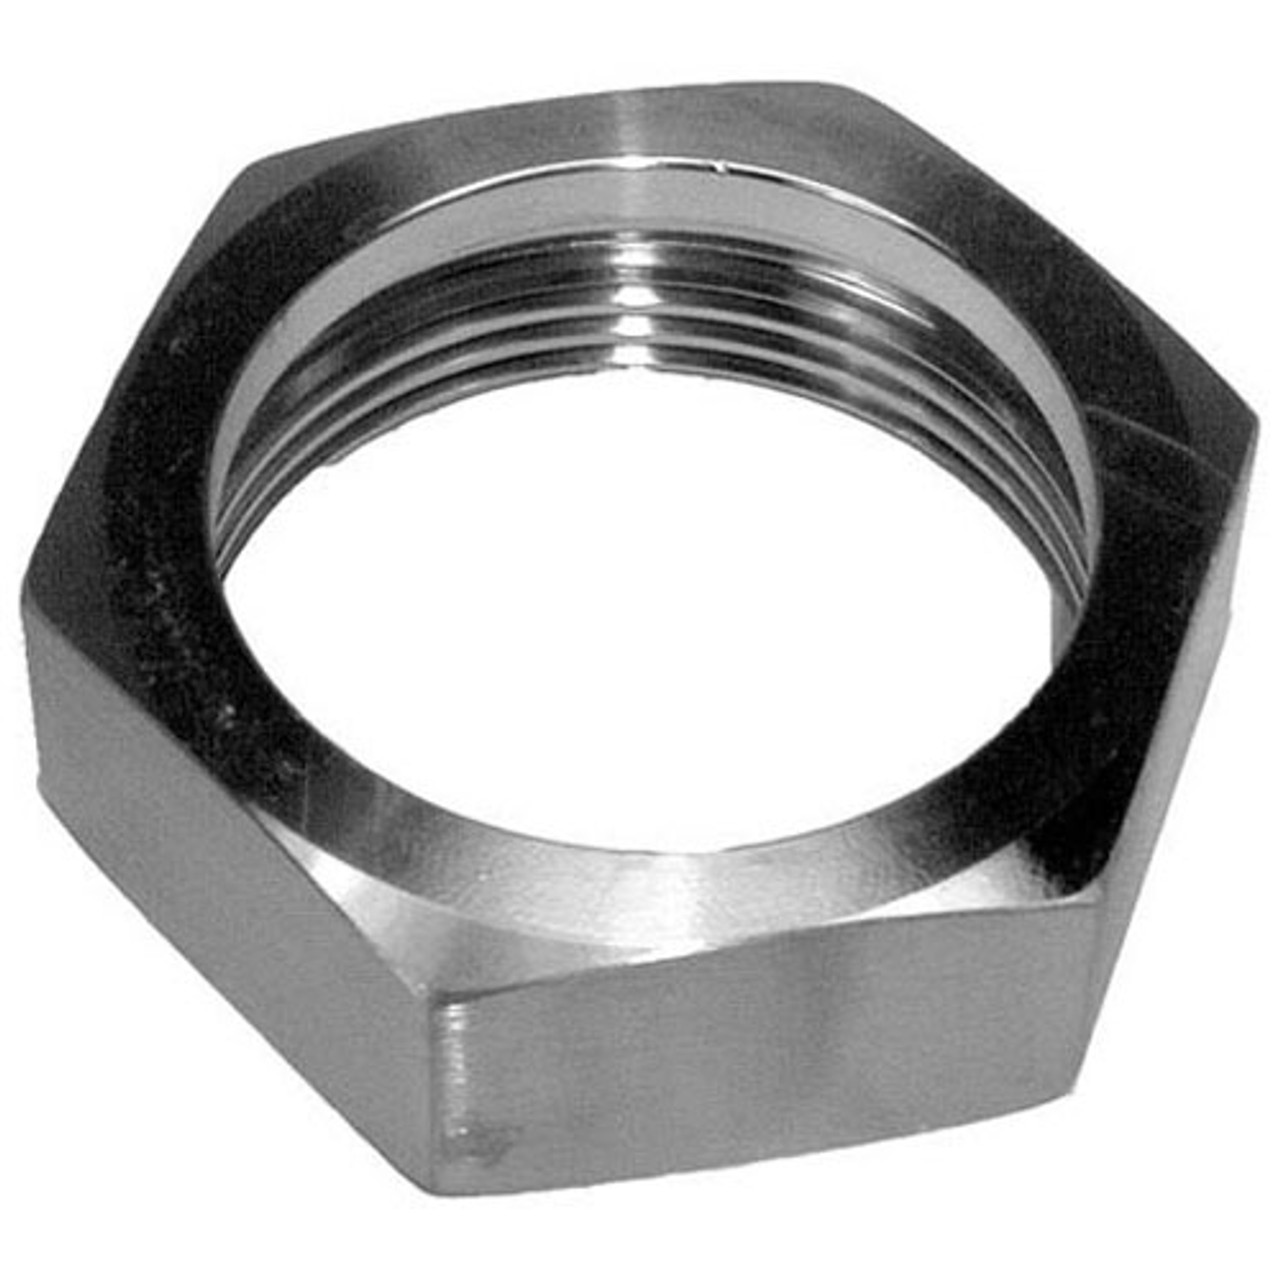 Hex Nut - Replacement Part For Market Forge S20-0194